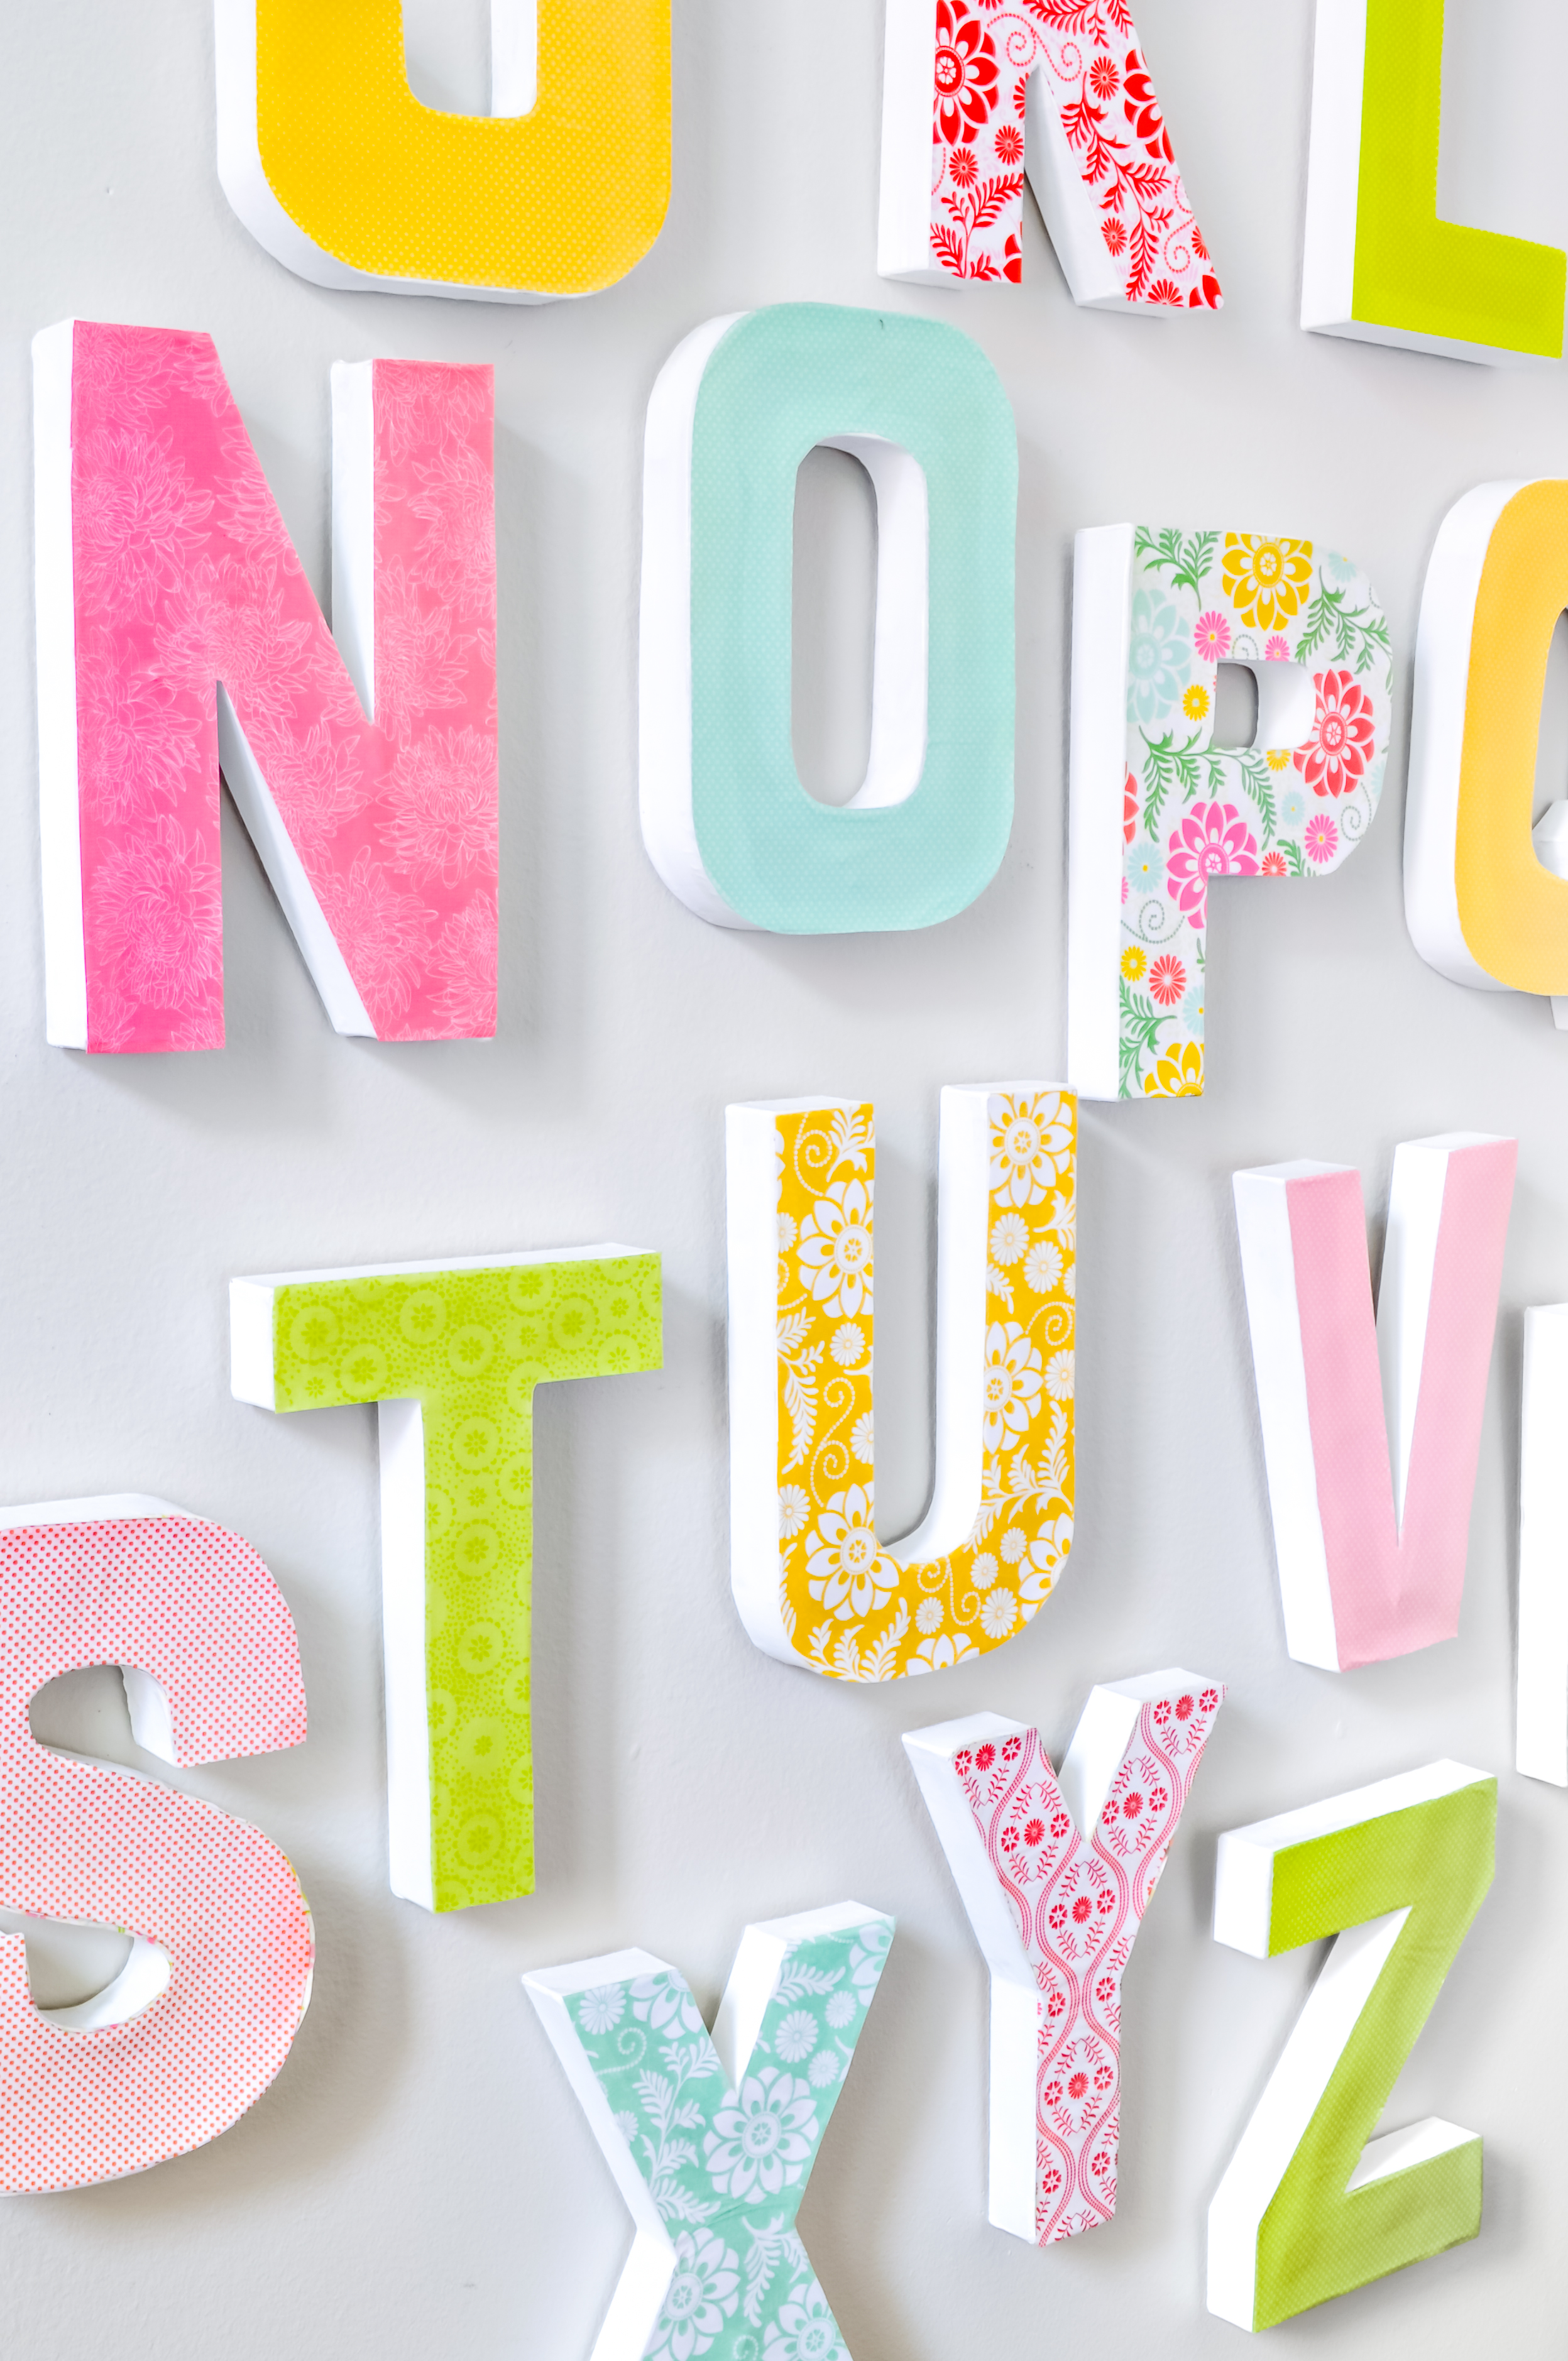 Make a Big Impact in your Home Decor with these DIY Wall Letters! These decorative paper mache or wood letters are easy to customize for your gallery wall, office, nursery, or playroom. 